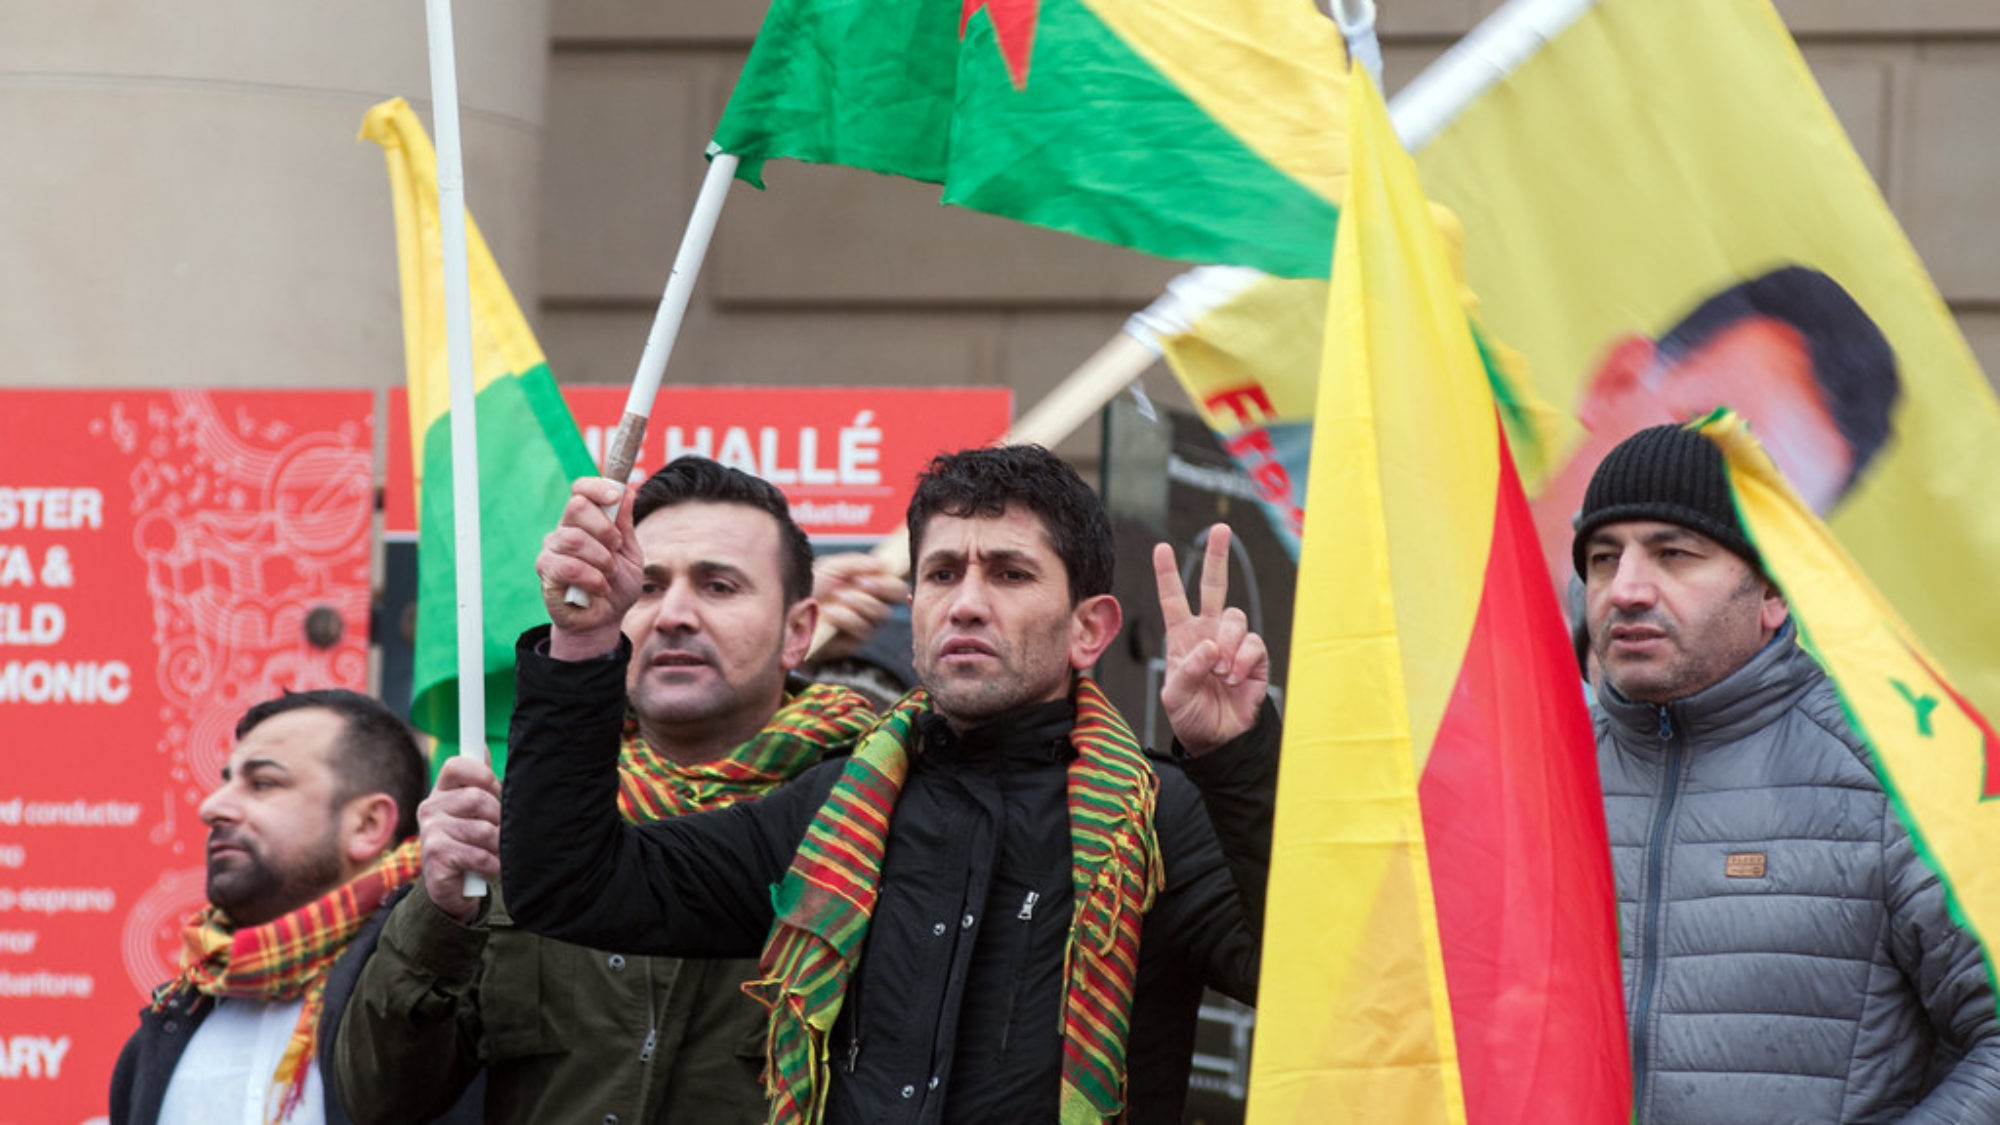 Four men holding Kurdish flags, participating in protest against Kurdish military aggression.